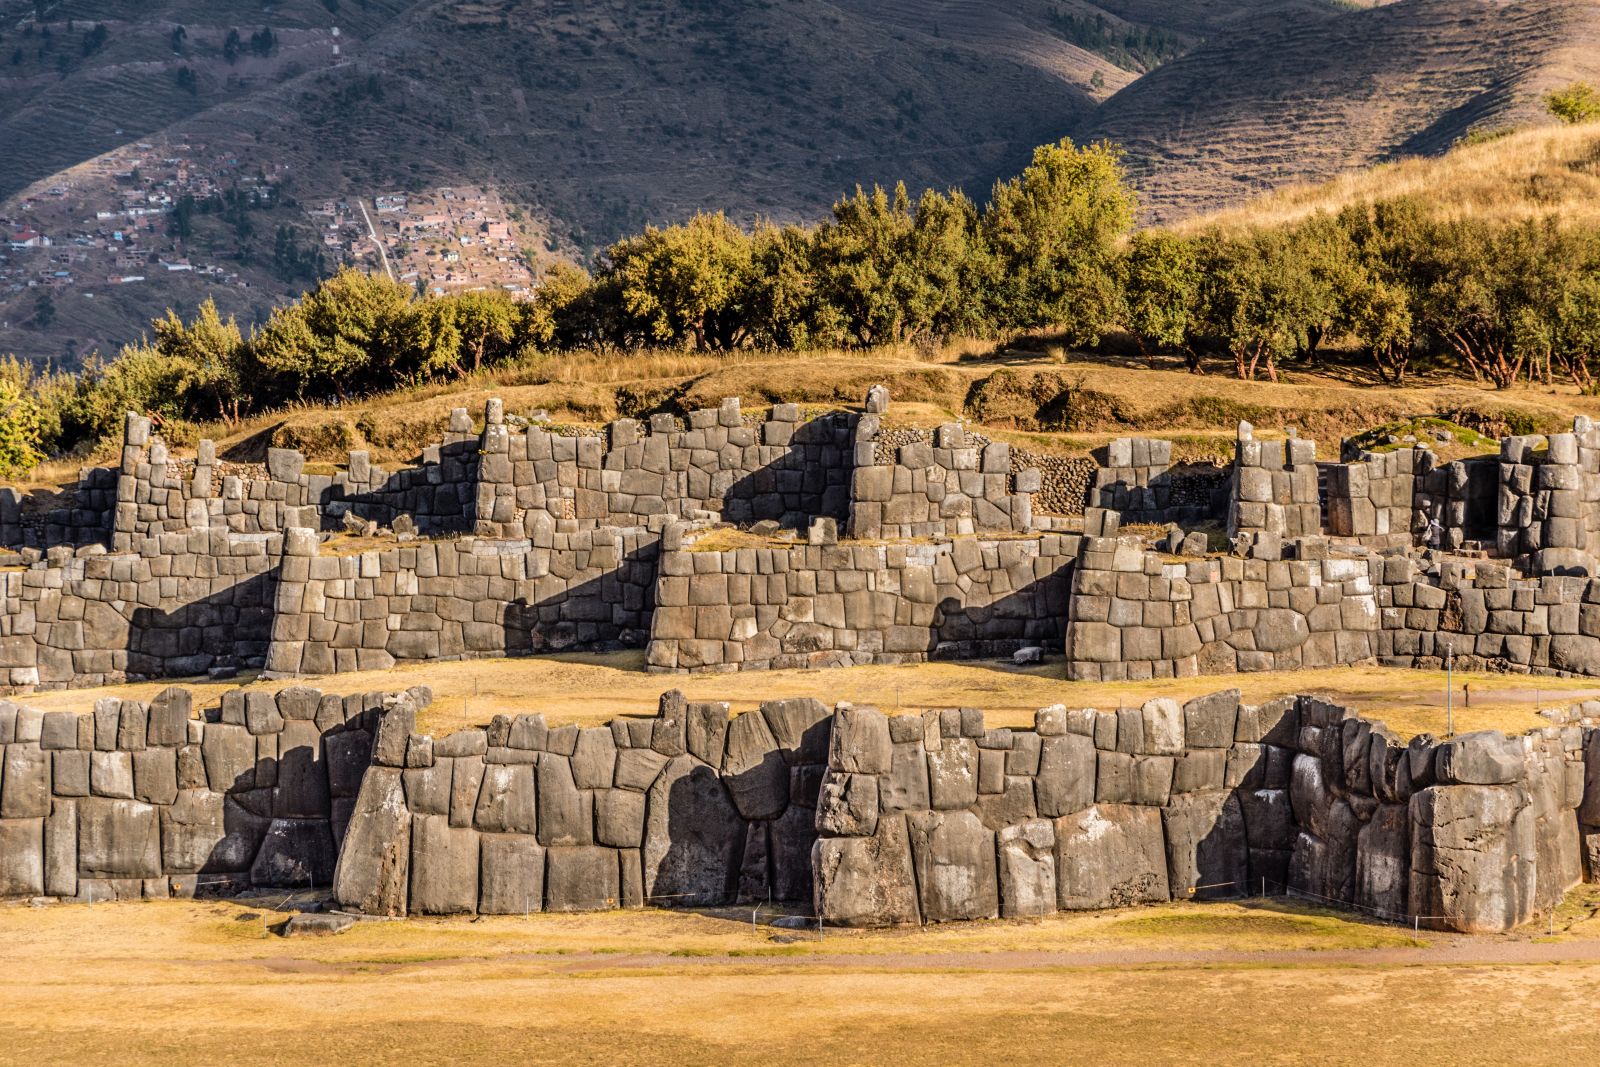 View of rows of Inca walls on the hills of Sacsayhuaman near Cusco in Peru